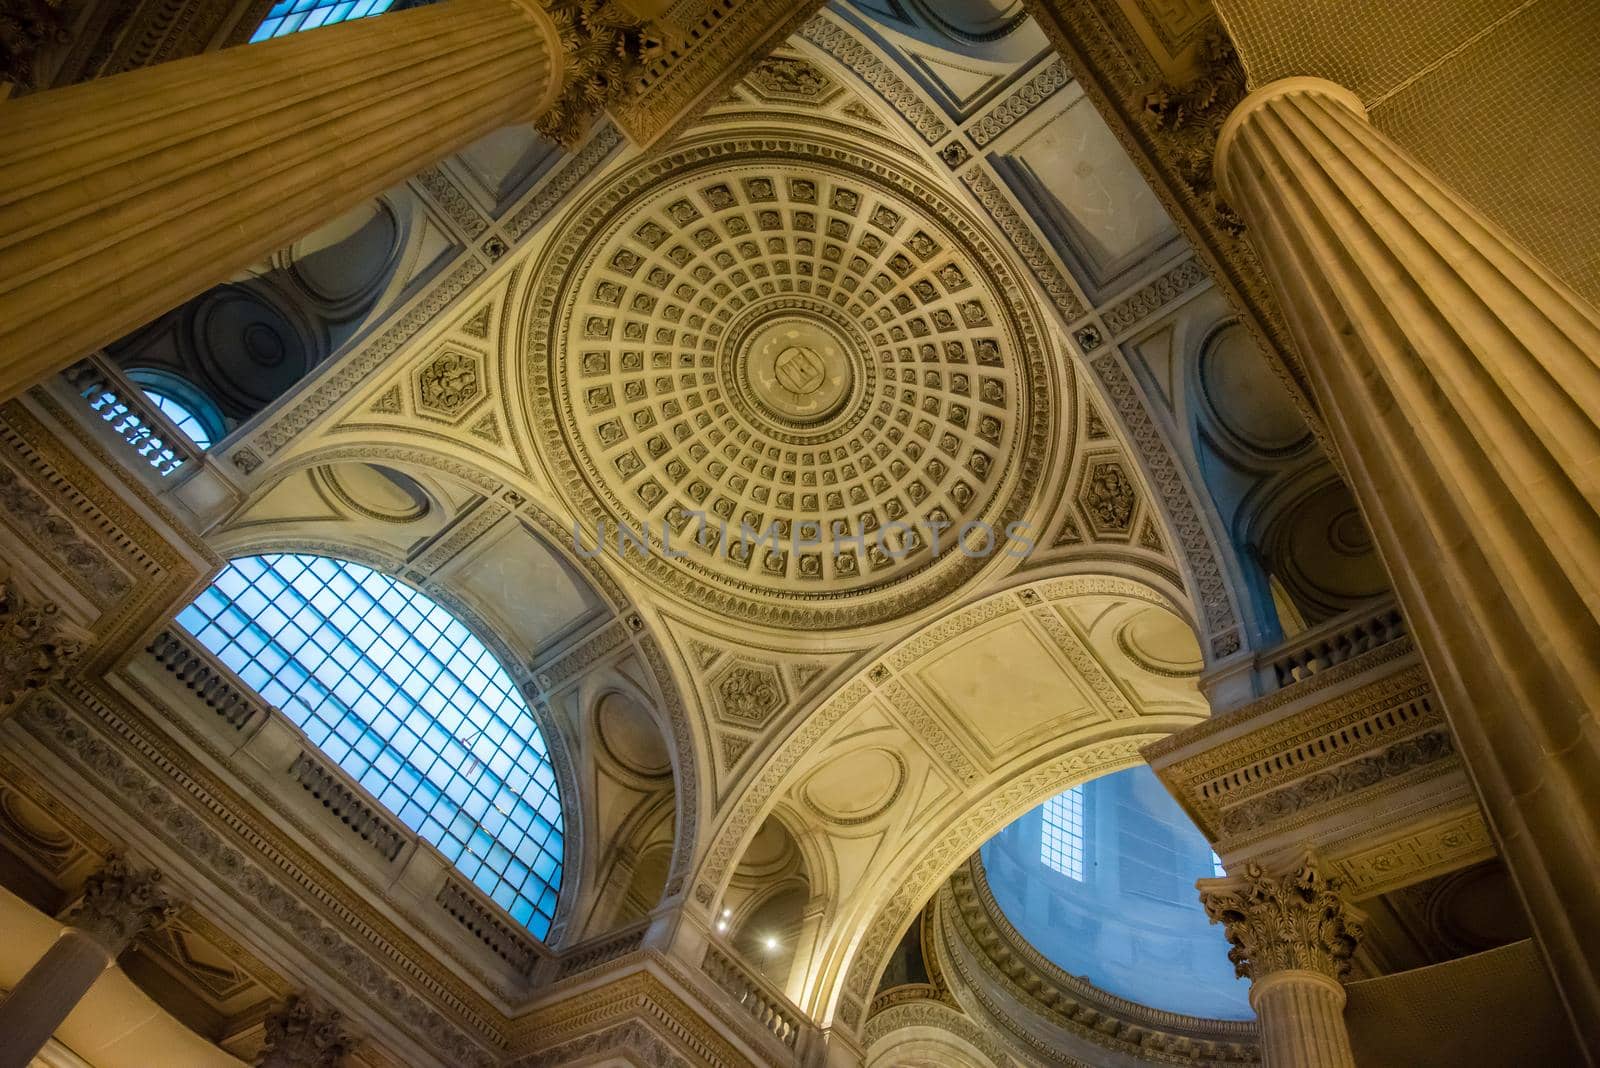 Paris, France. Gorgeous interior dome structure in a Paris museum. Looking up by jyurinko